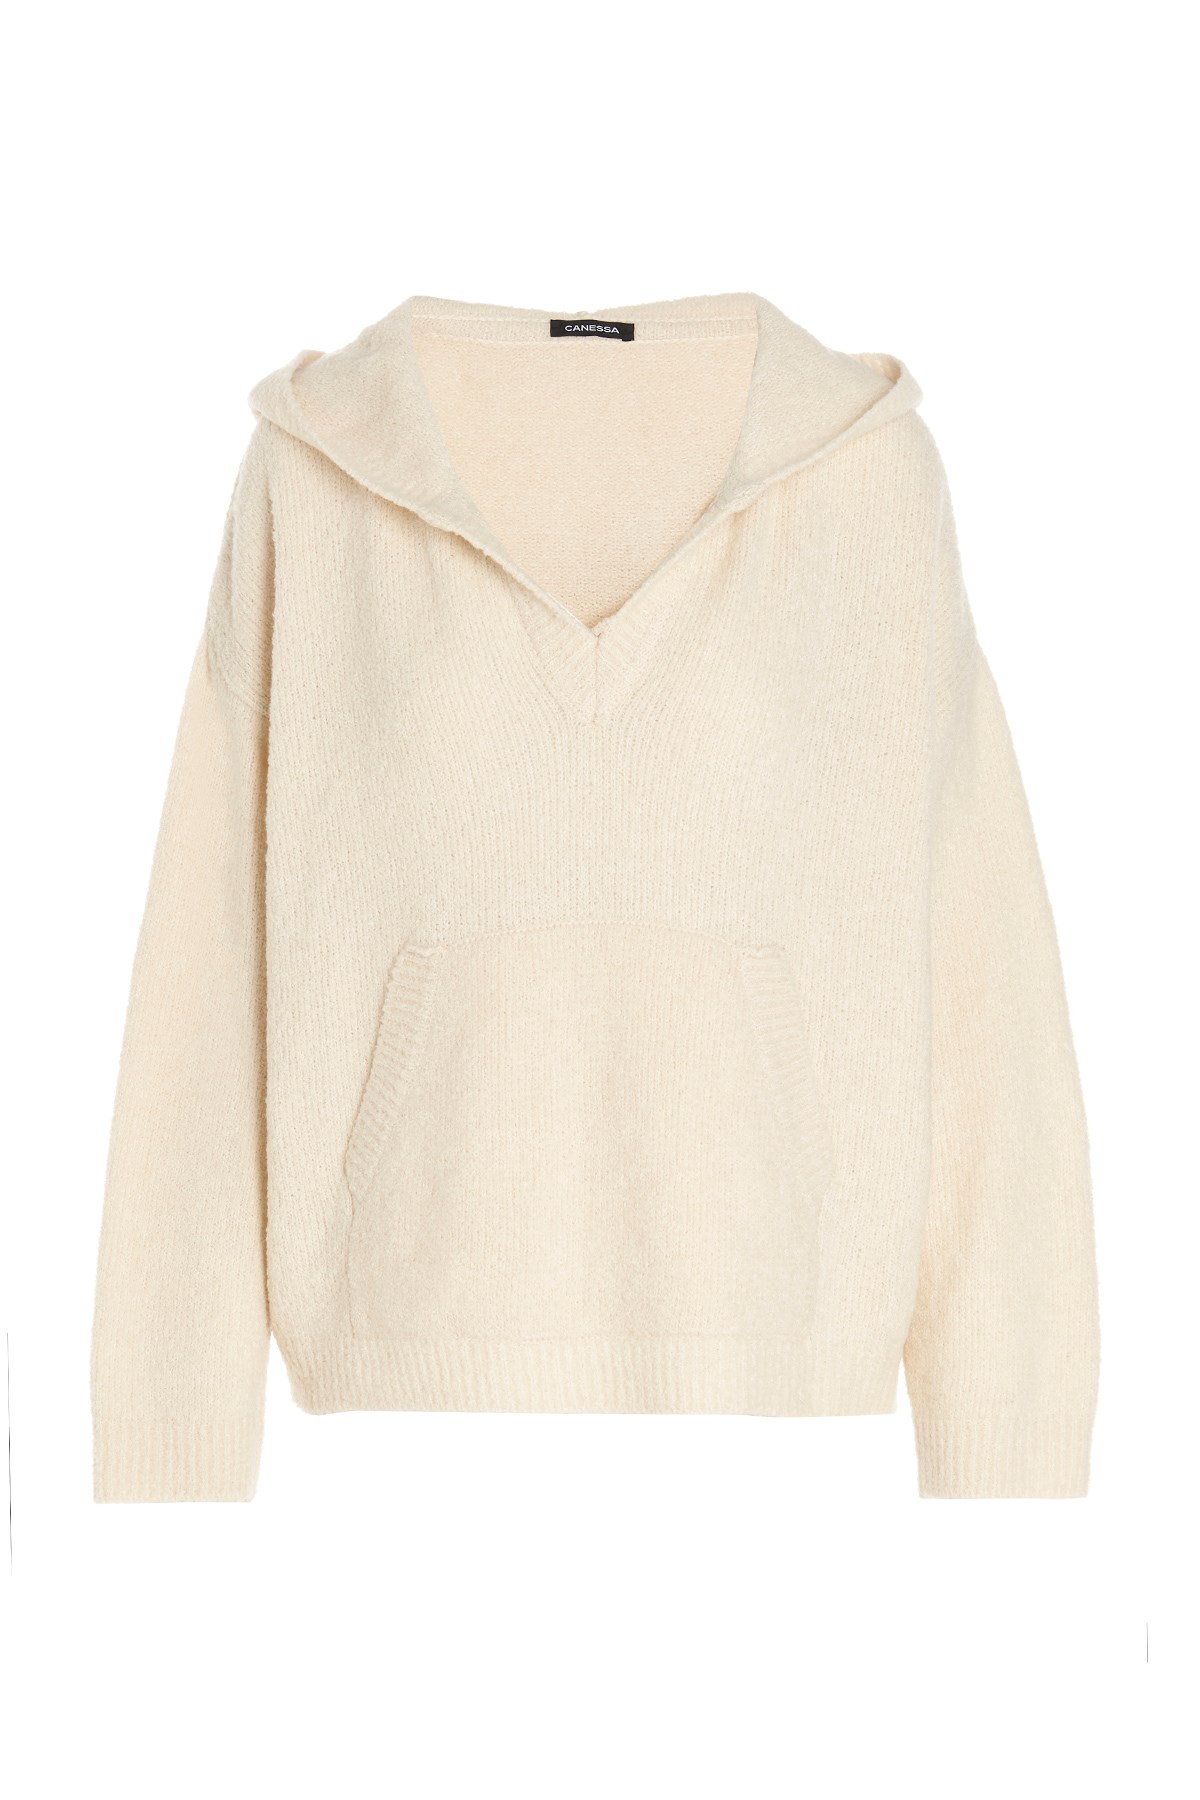 CANESSA Hooded Sweater